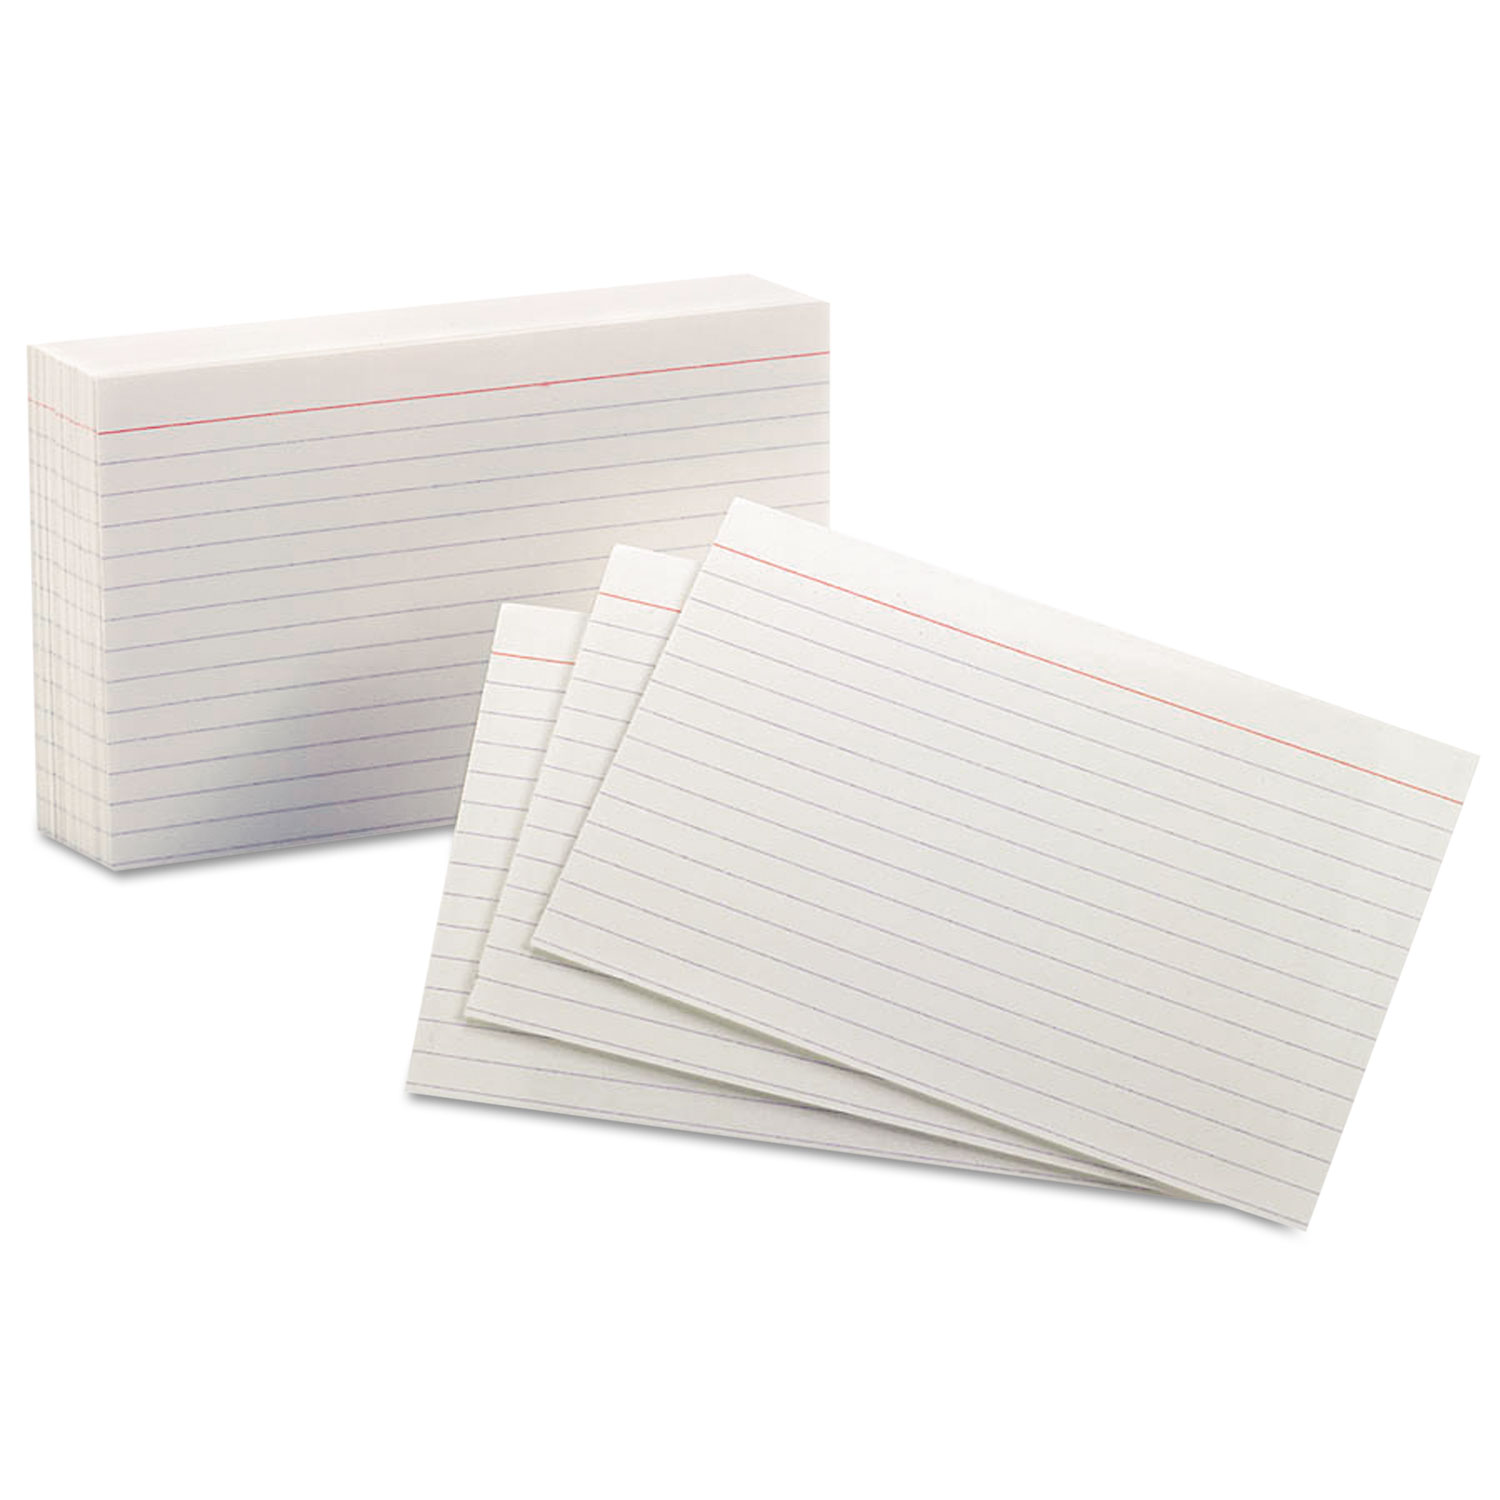  Oxford 41EE Ruled Index Cards, 4 x 6, White, 100/Pack (OXF41) 